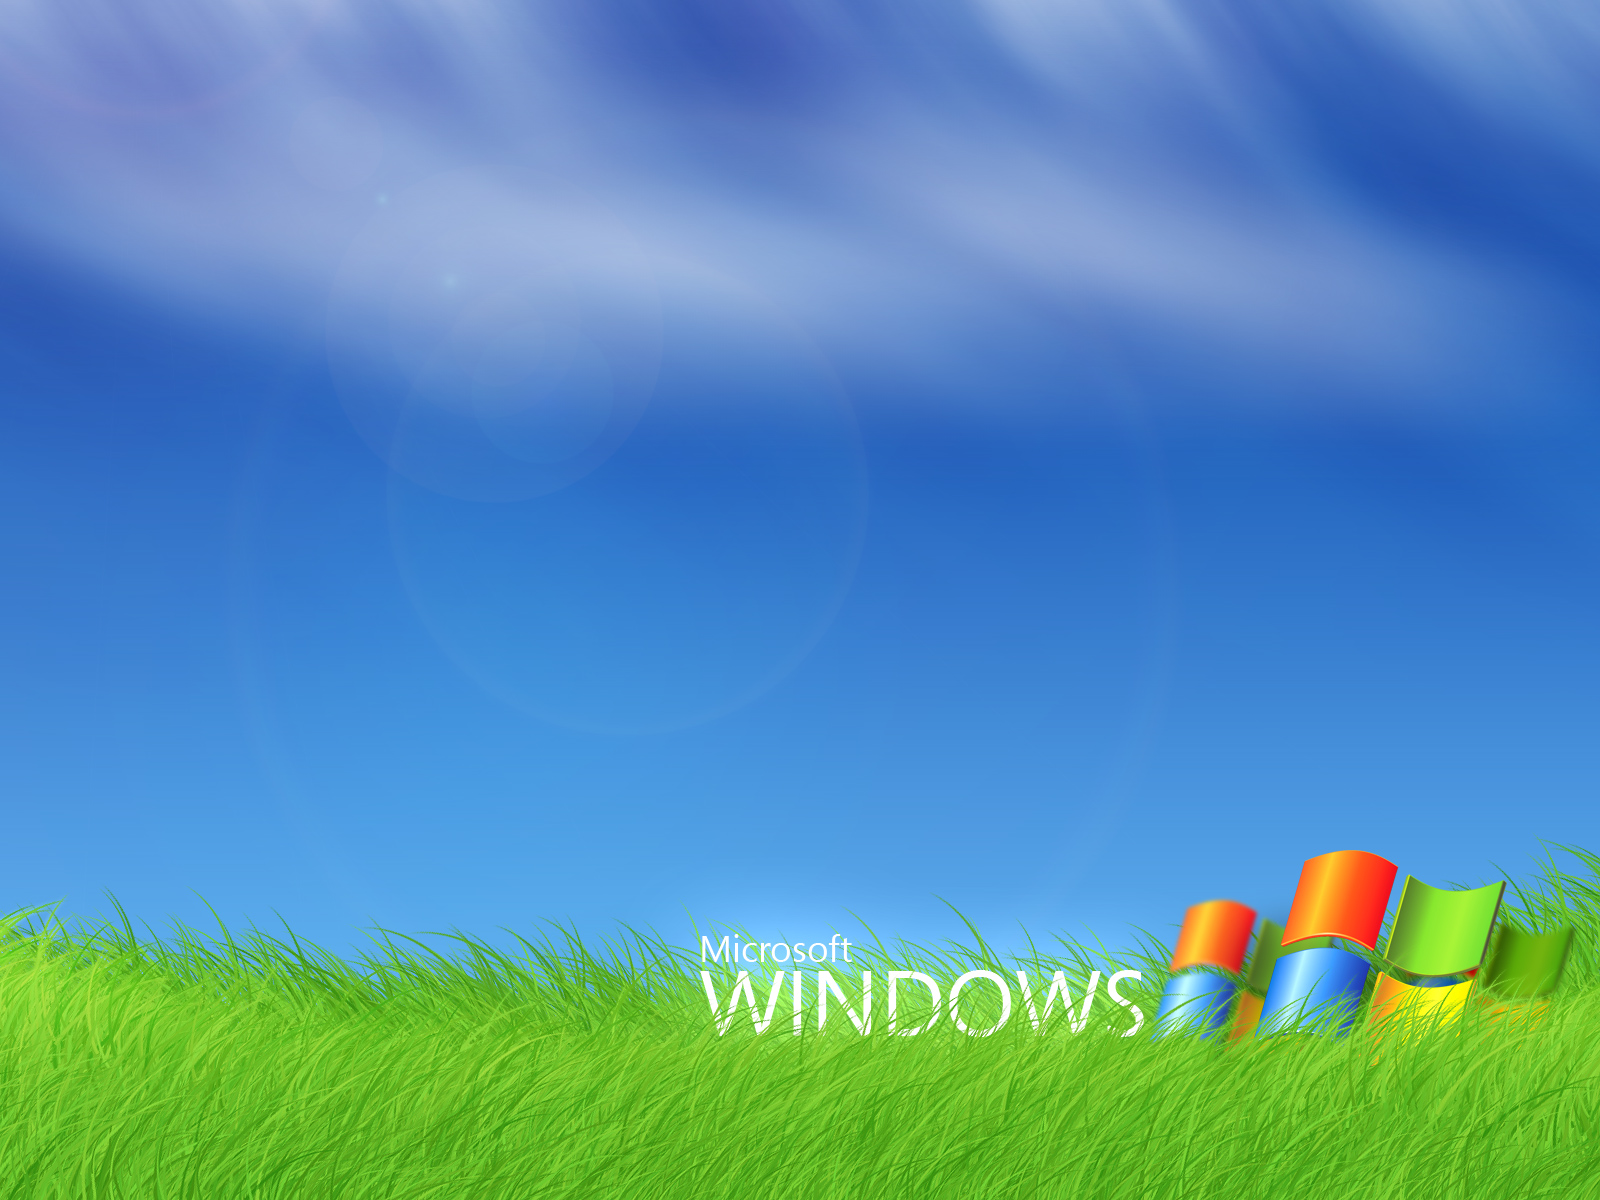  Windows Vista Wallpapers   Free Screensavers Themes Backgrounds